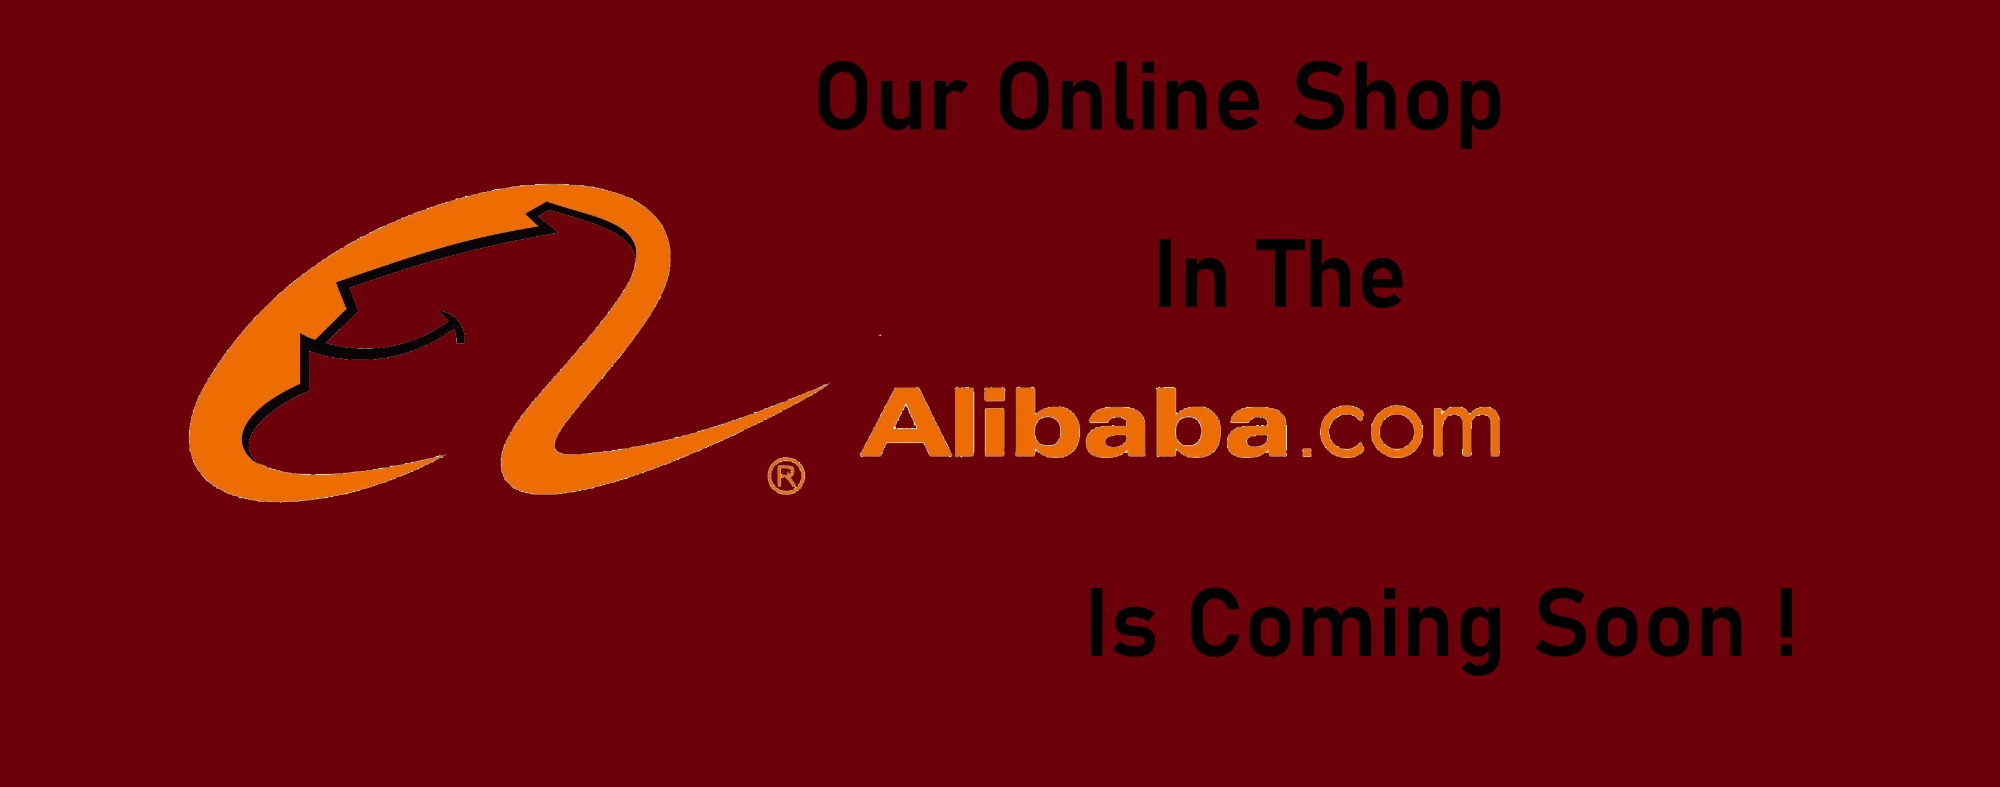 Our Online Shop On Alibaba is Coming!